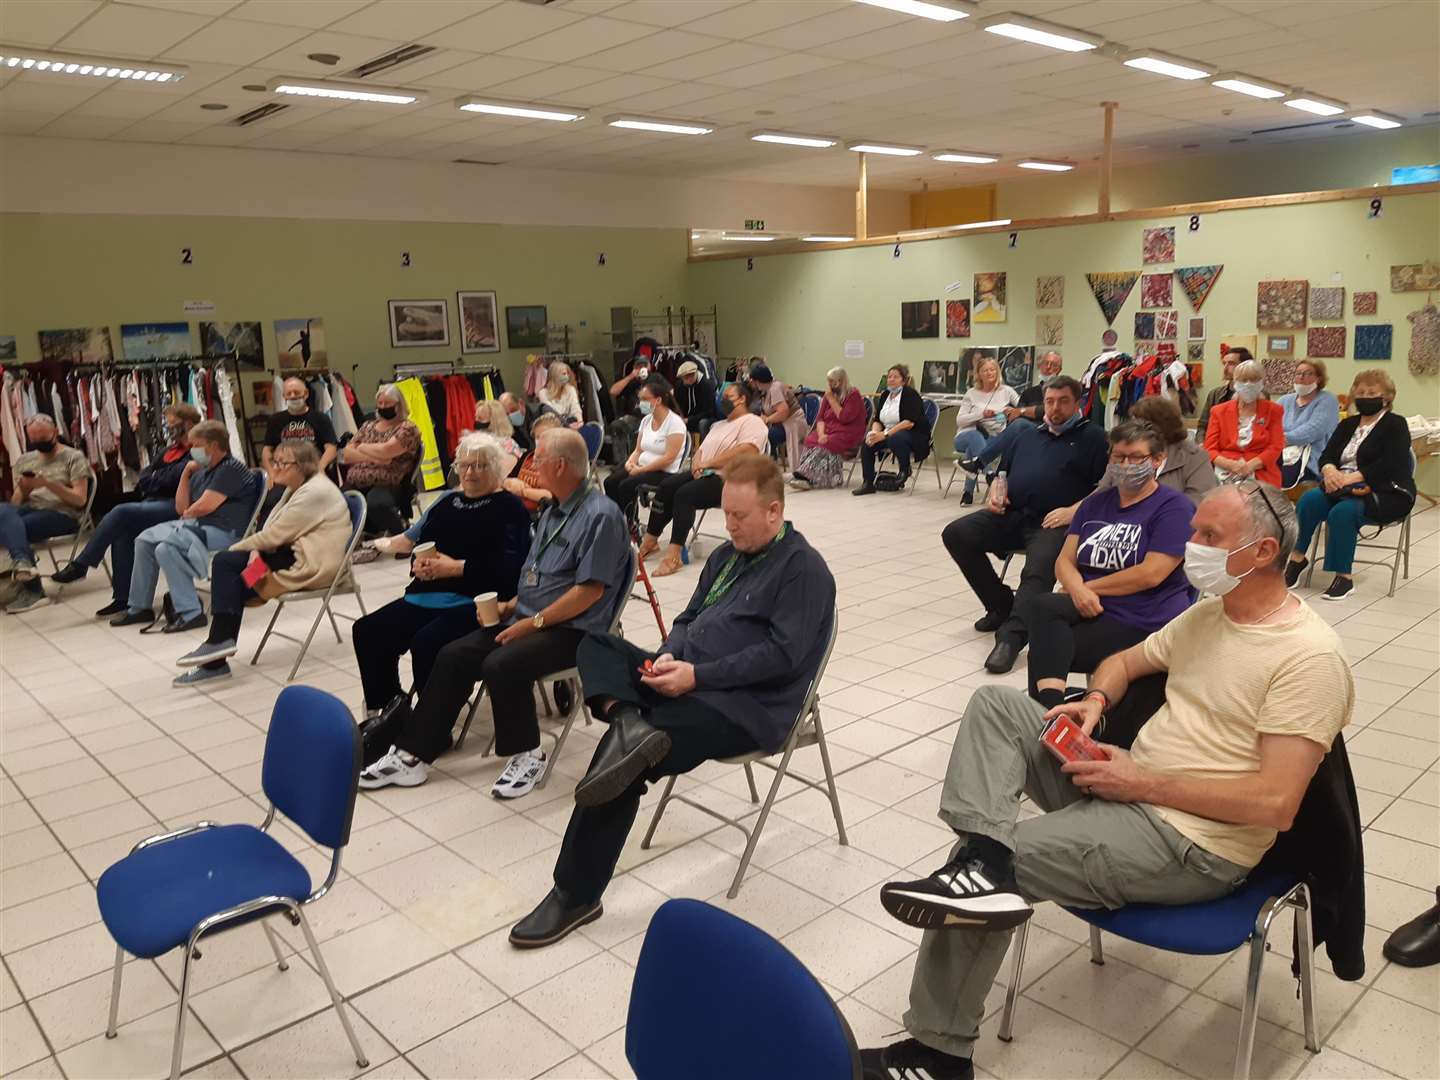 The audience at the meeting, seated socially distanced because of Covid, Picture: Sam Lennon